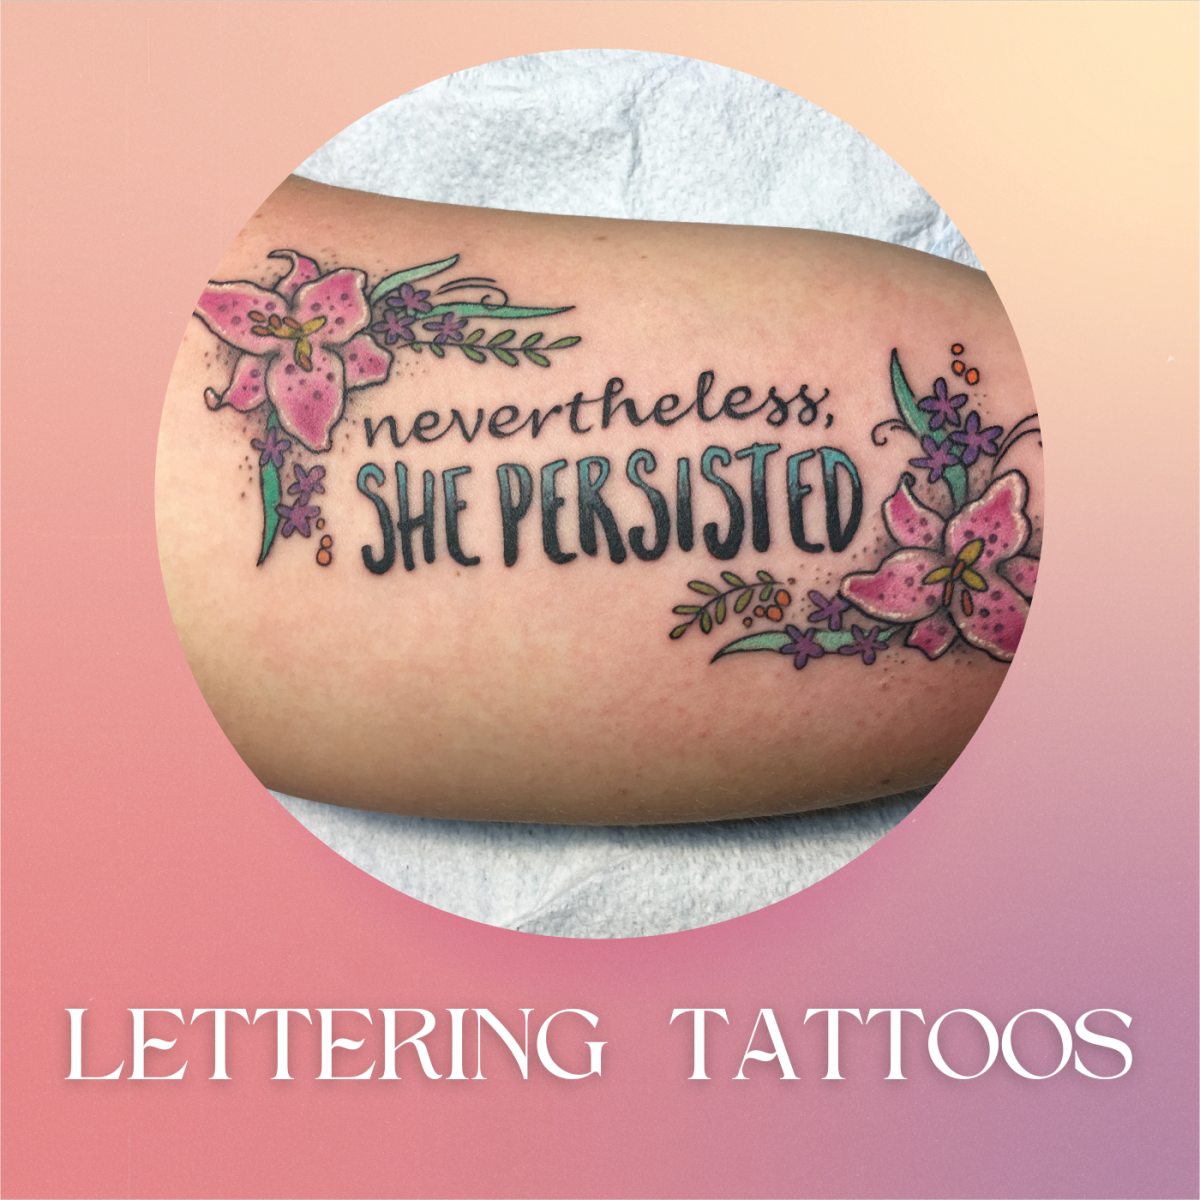 Here are tattoo lettering ideas from songs, films, and other sources.